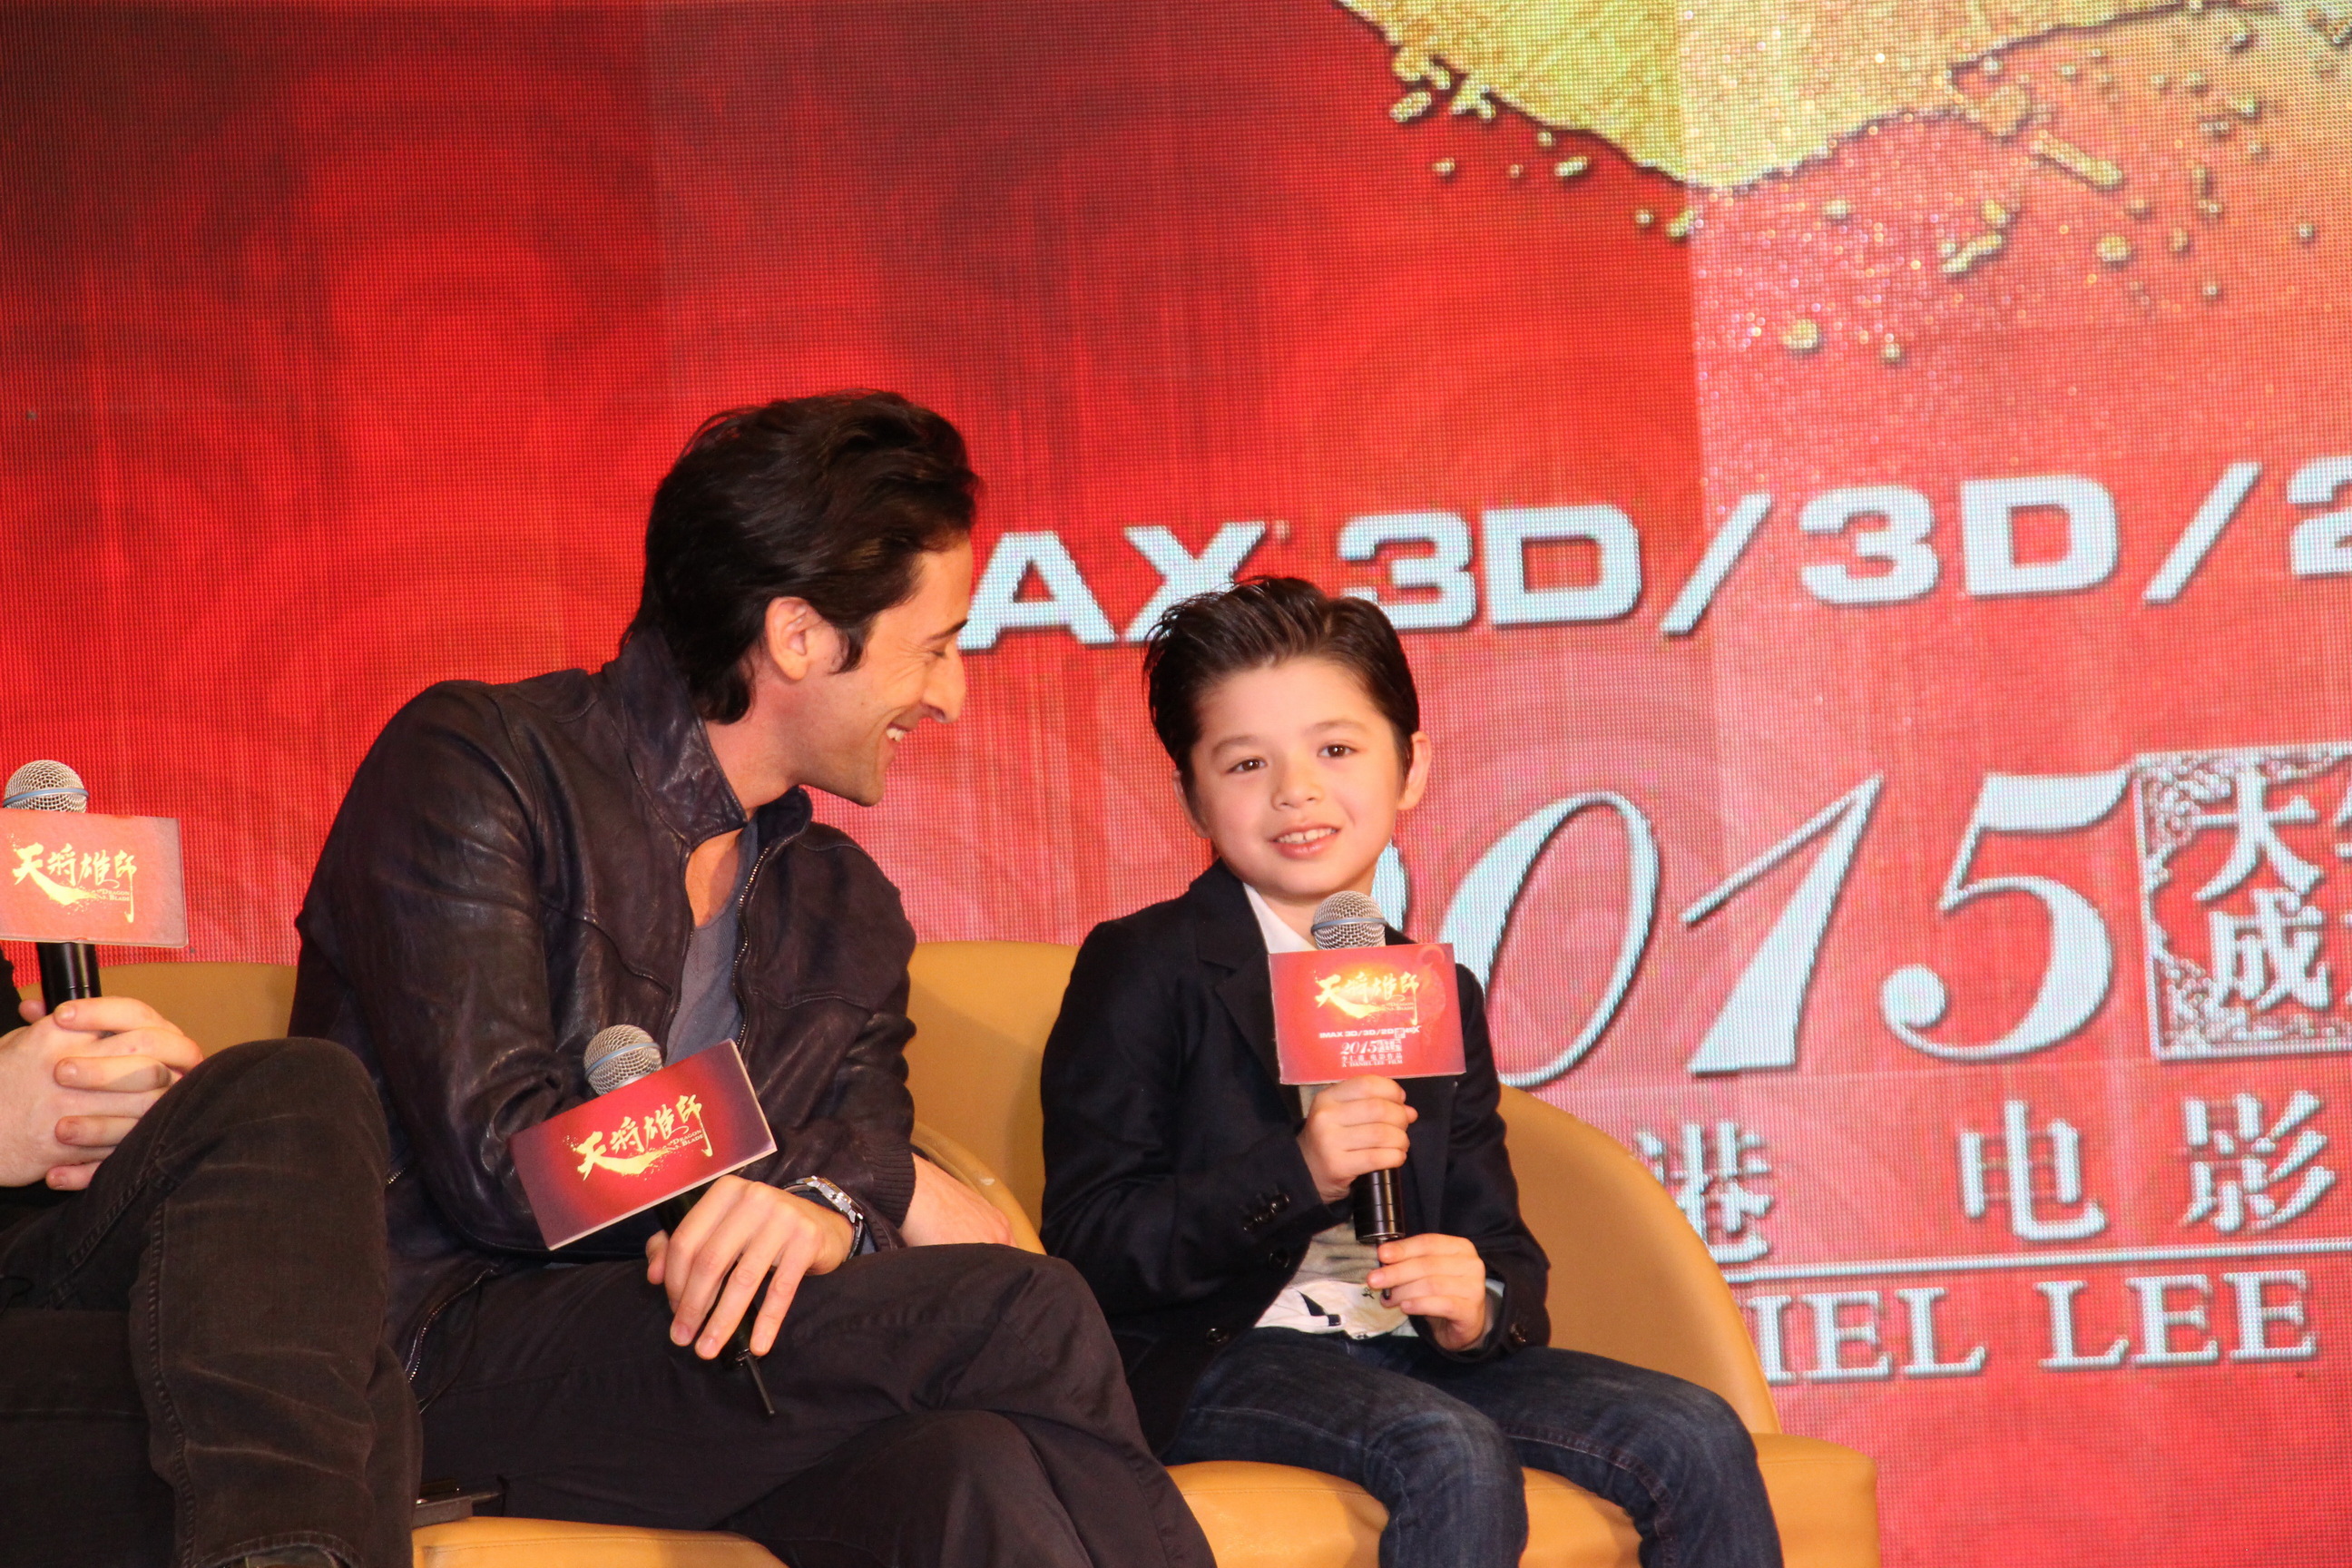 Adrien Brody is amused with Jozef Waite's story in Beijing, China at the Dragon Blade premiere. February 2015.